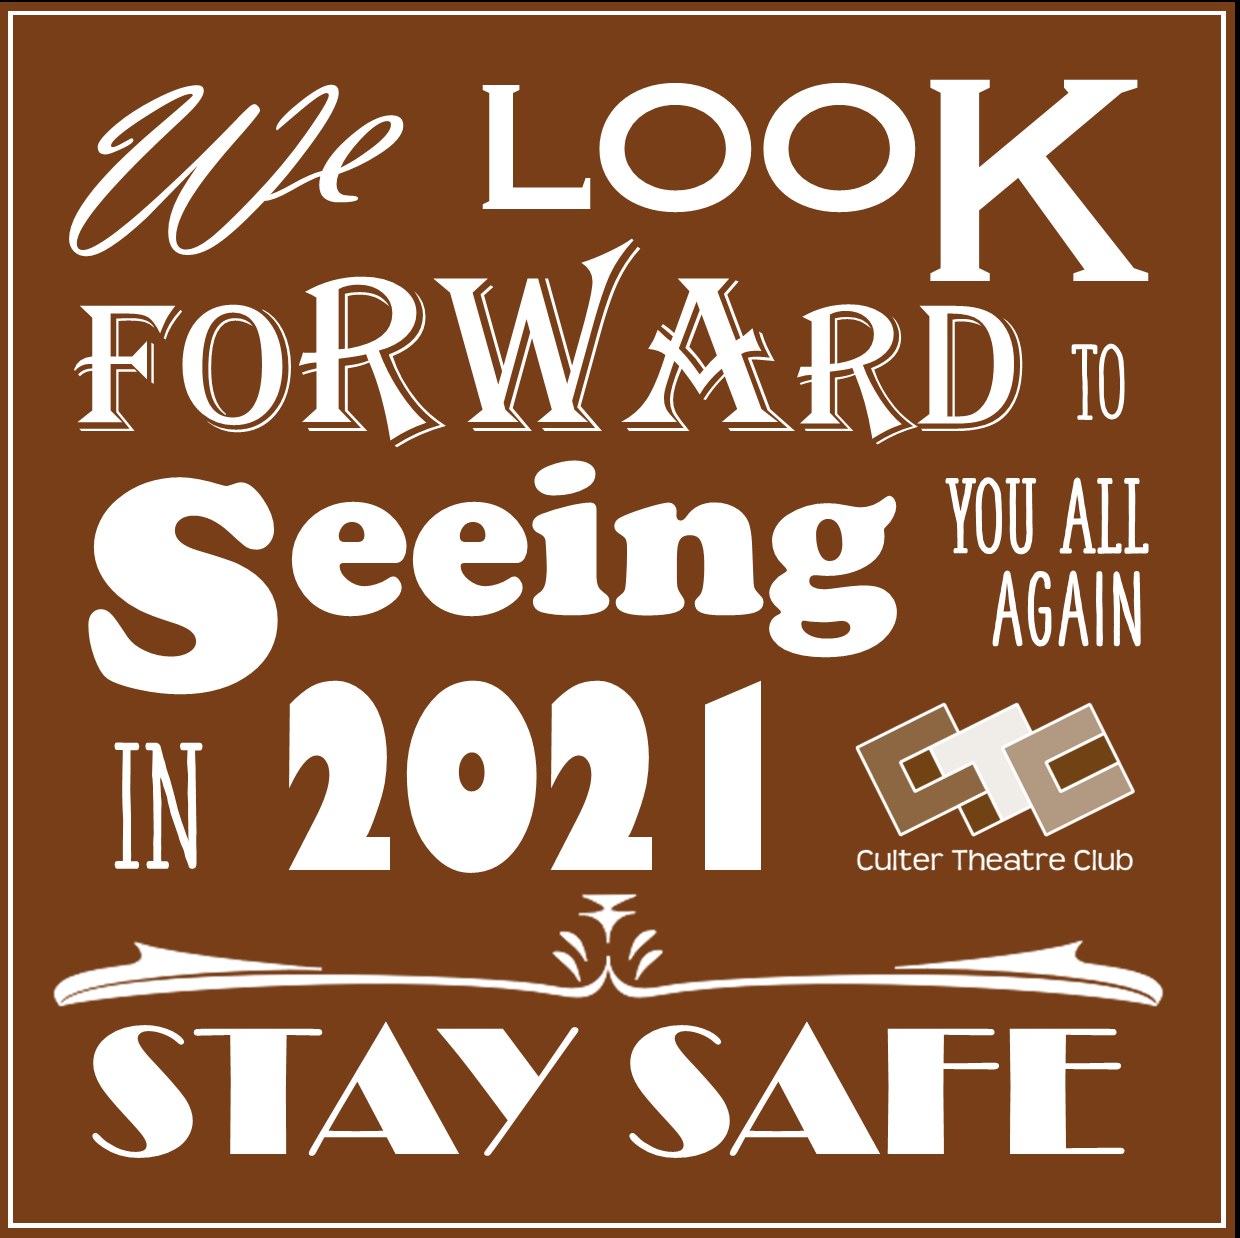 We look forward to seeing you all again in 2021 - Stay Safe